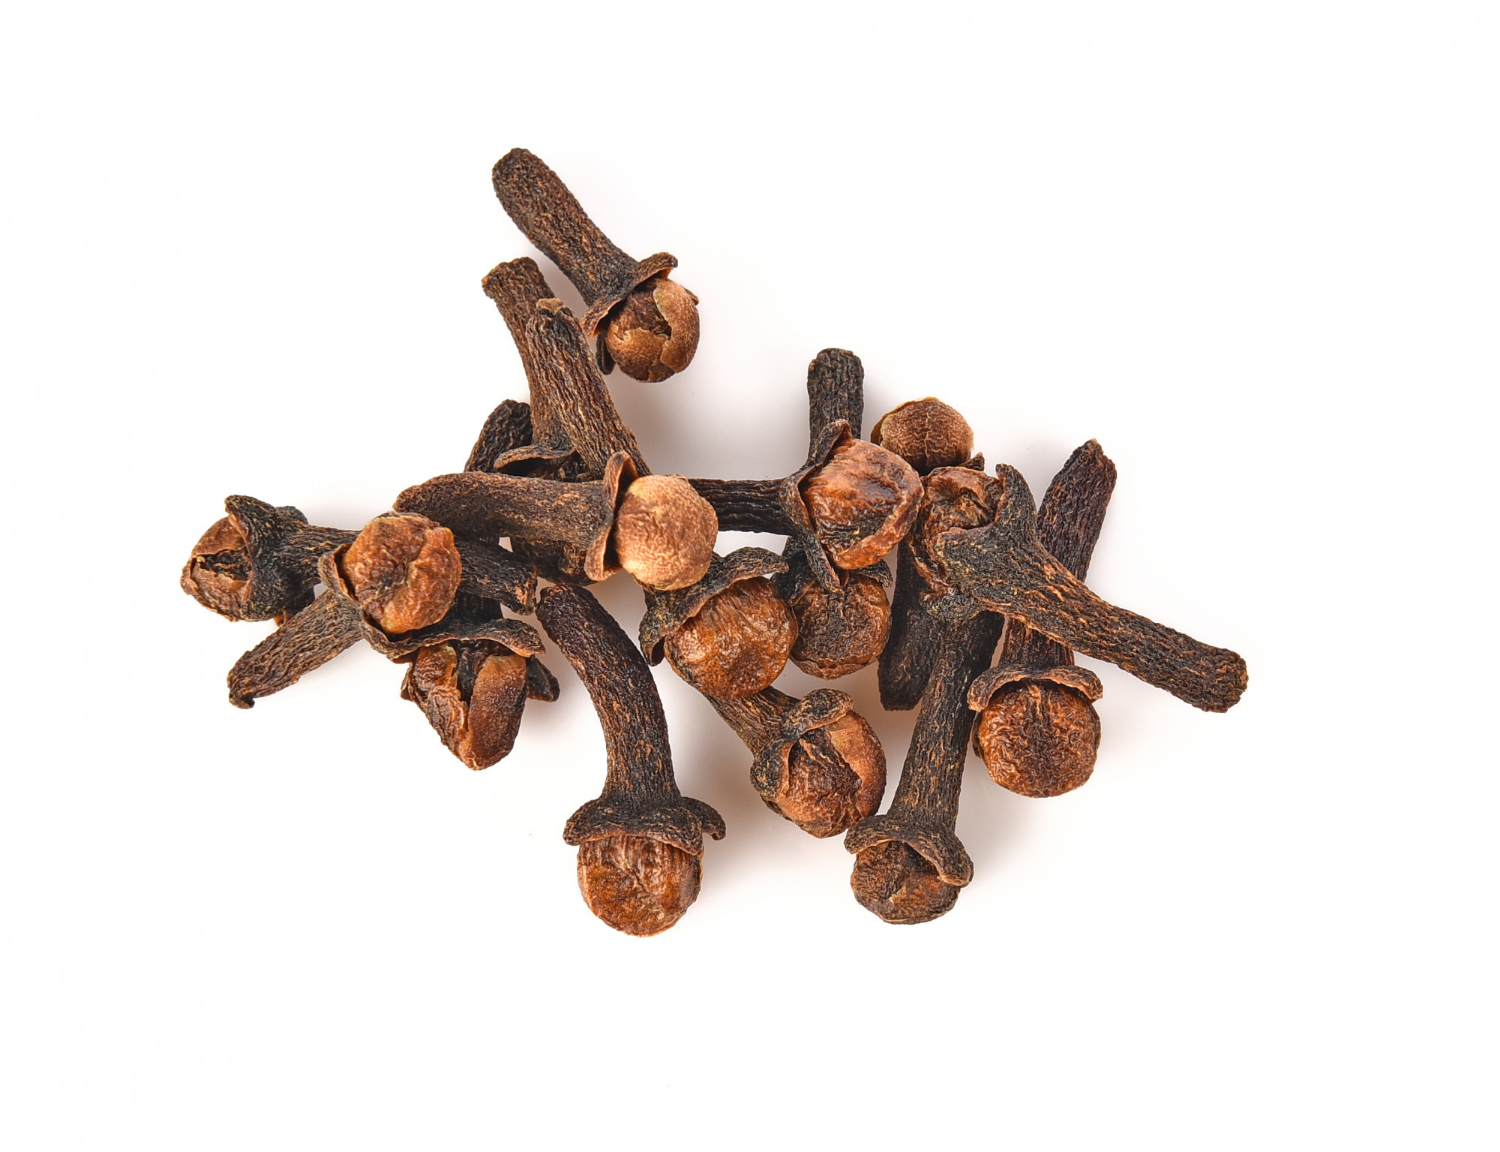 export quality cloves